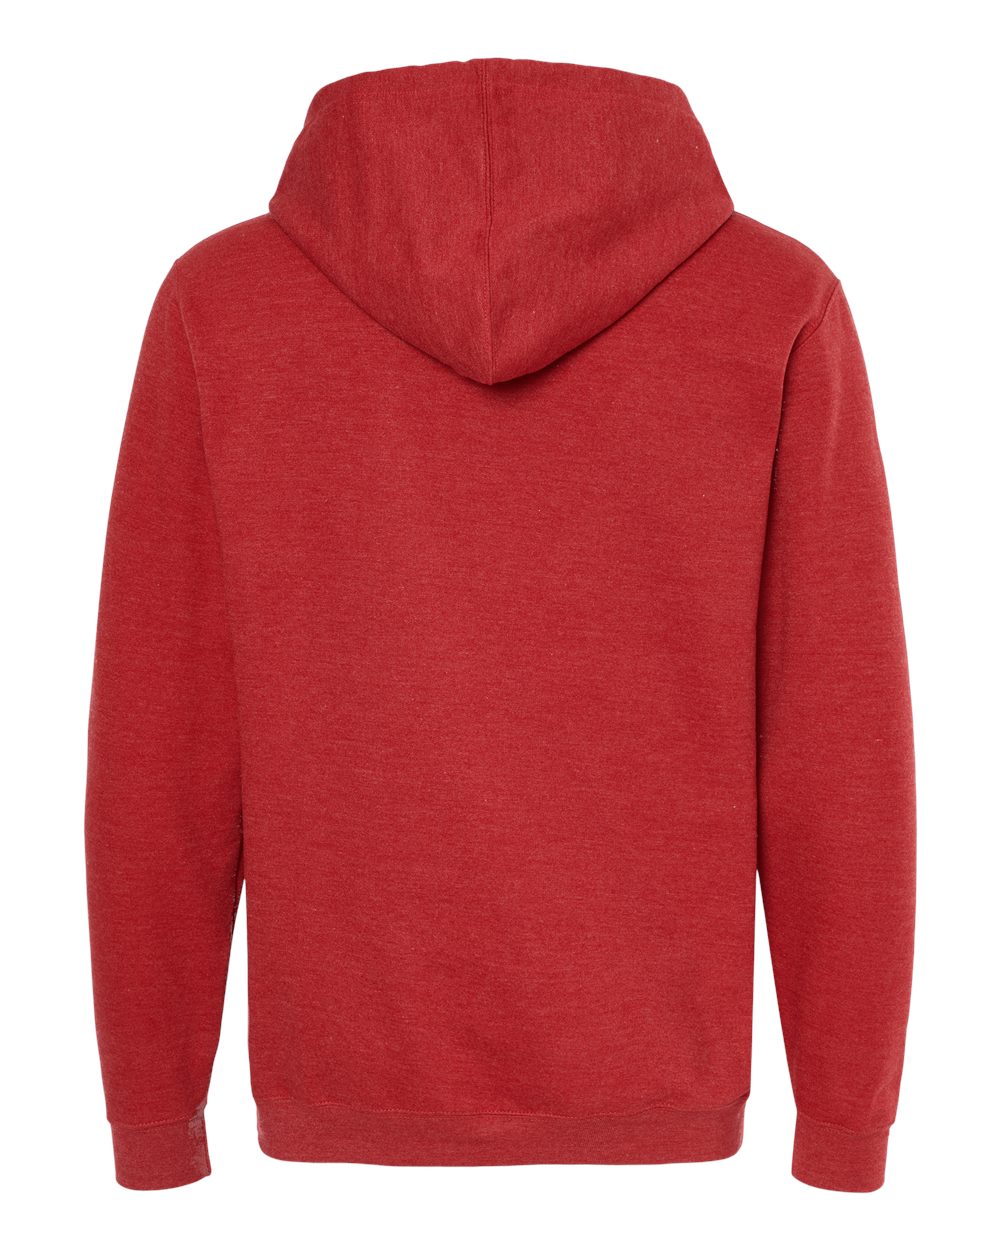 M&O Unisex Pullover Hoodie 3320 #color_Heather Red